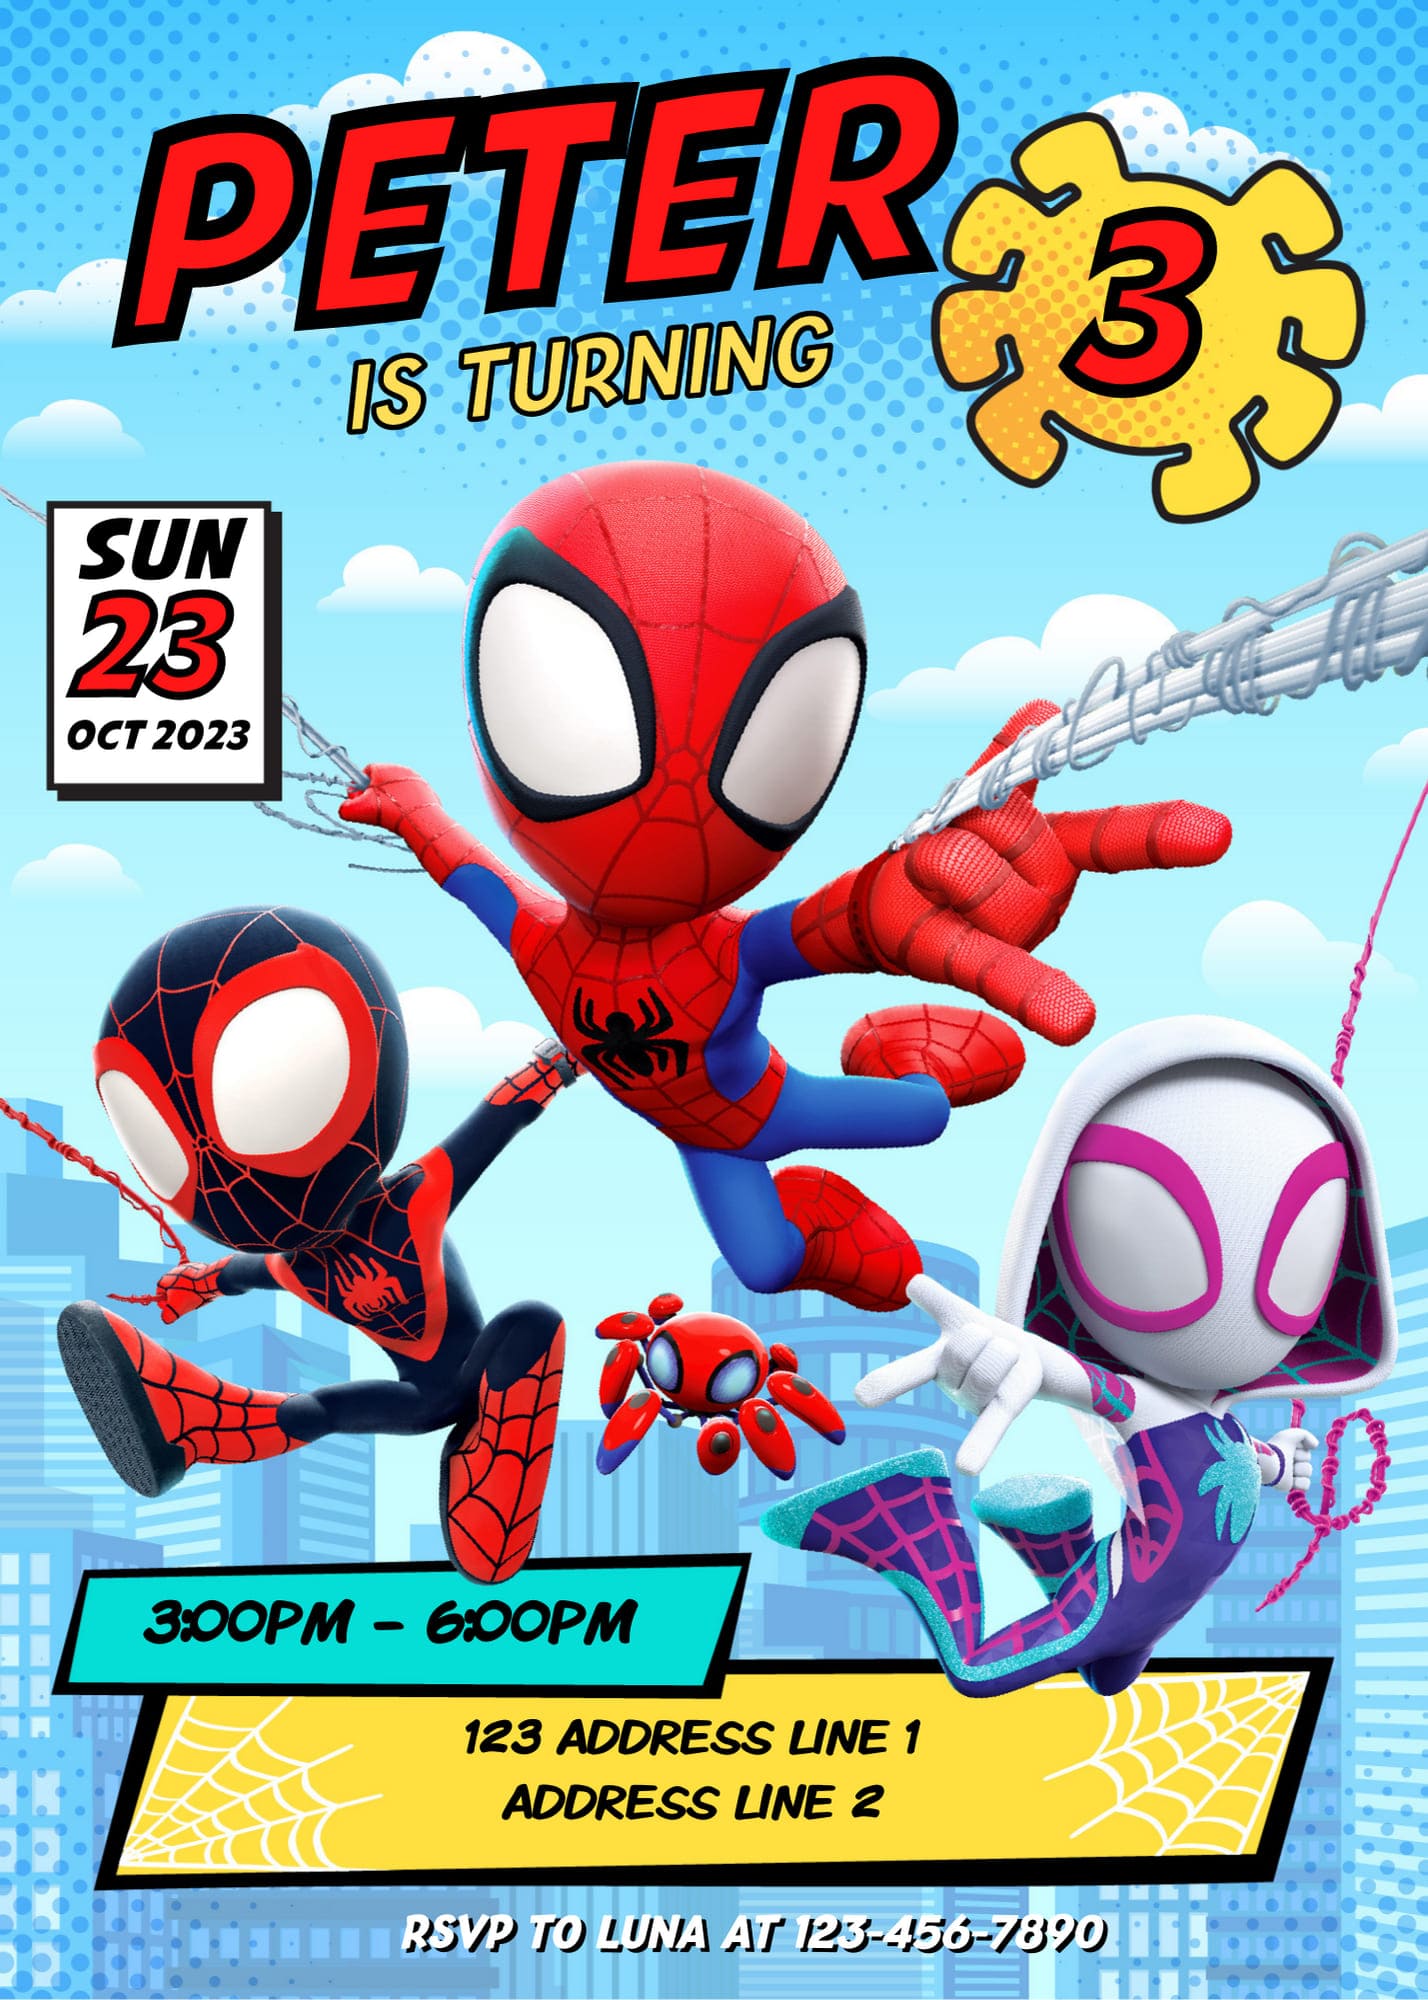 Spidey and His Amazing Friends Invitation, Spidey Invite, Spidey Birthday  Invitation, Spidey Invitation, Spidey and His Amazing Friends